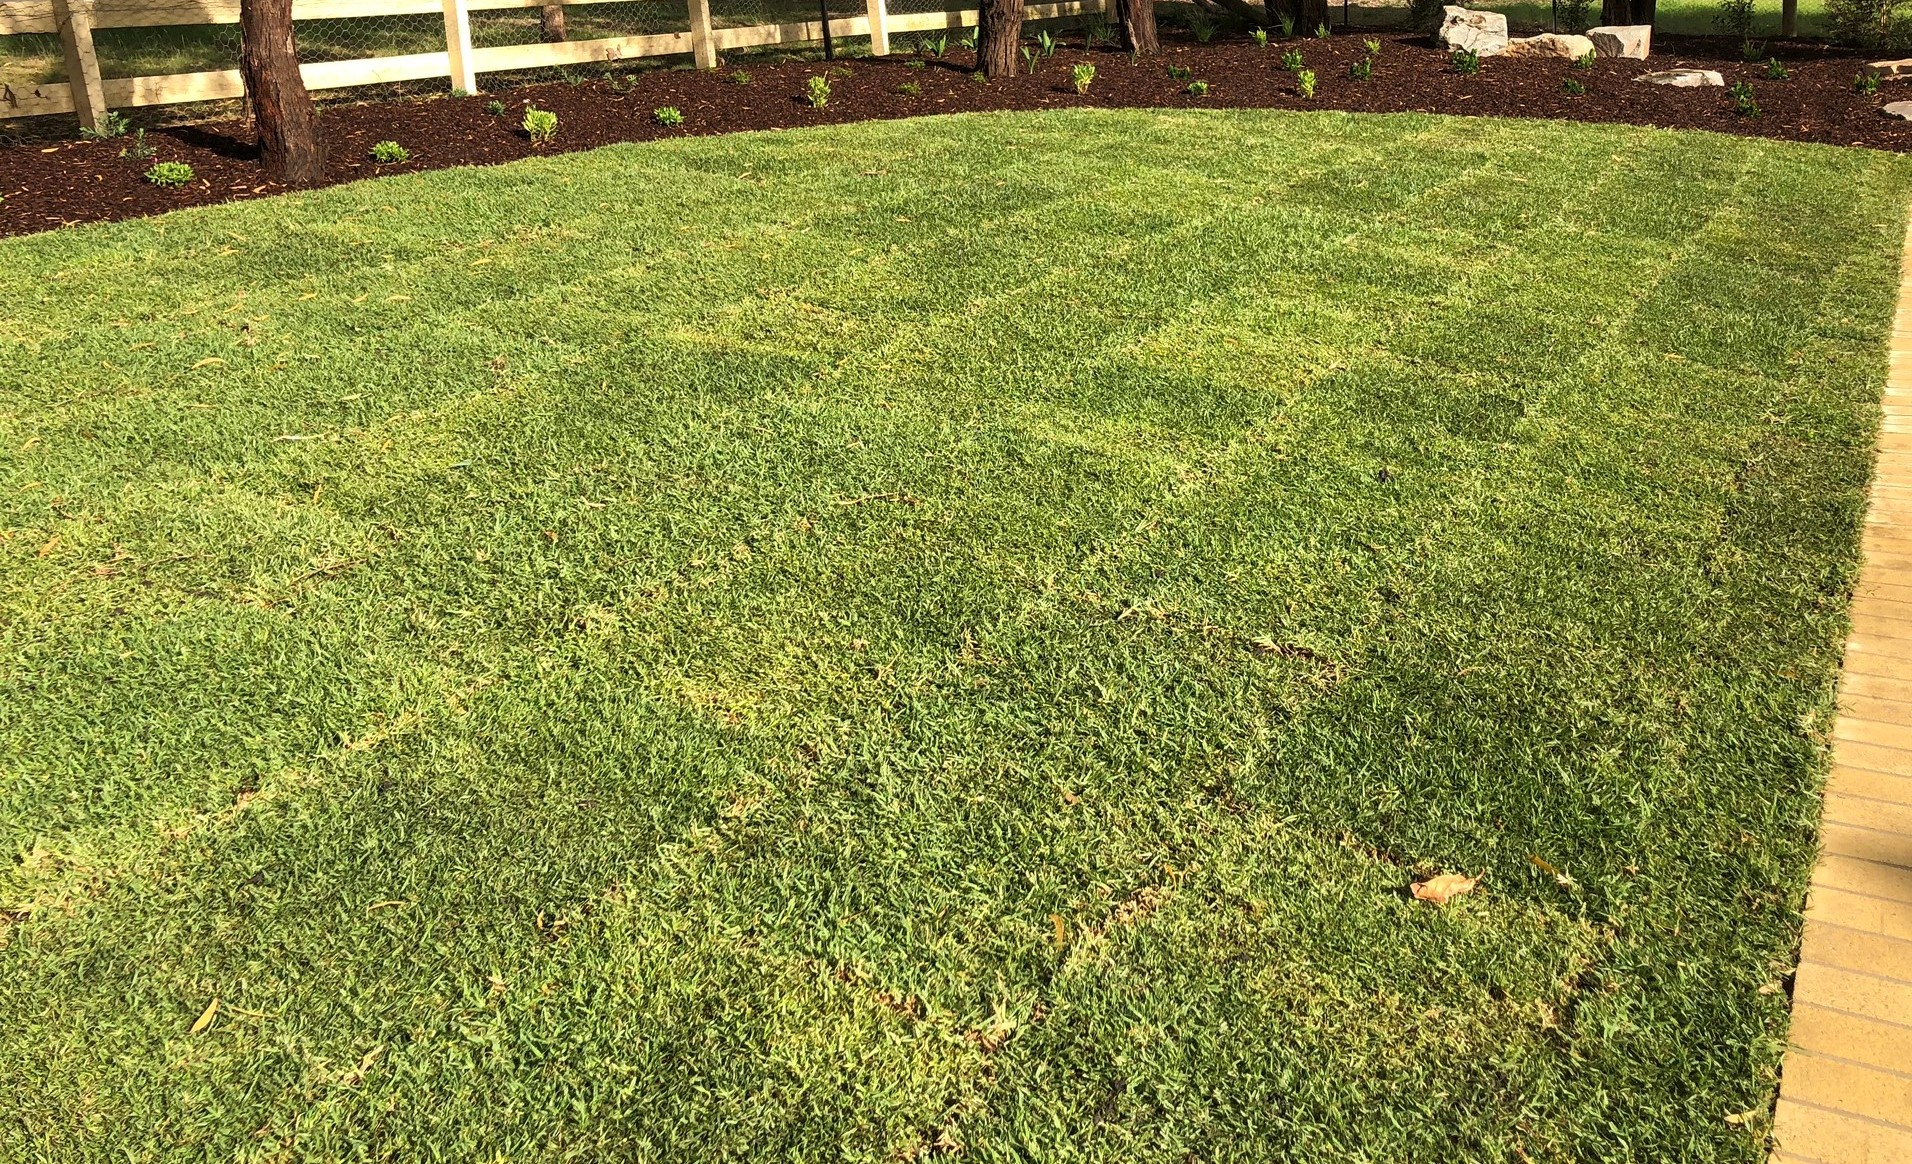 The Ultimate Lawn Care & Maintenance Guide | myhomeTURF